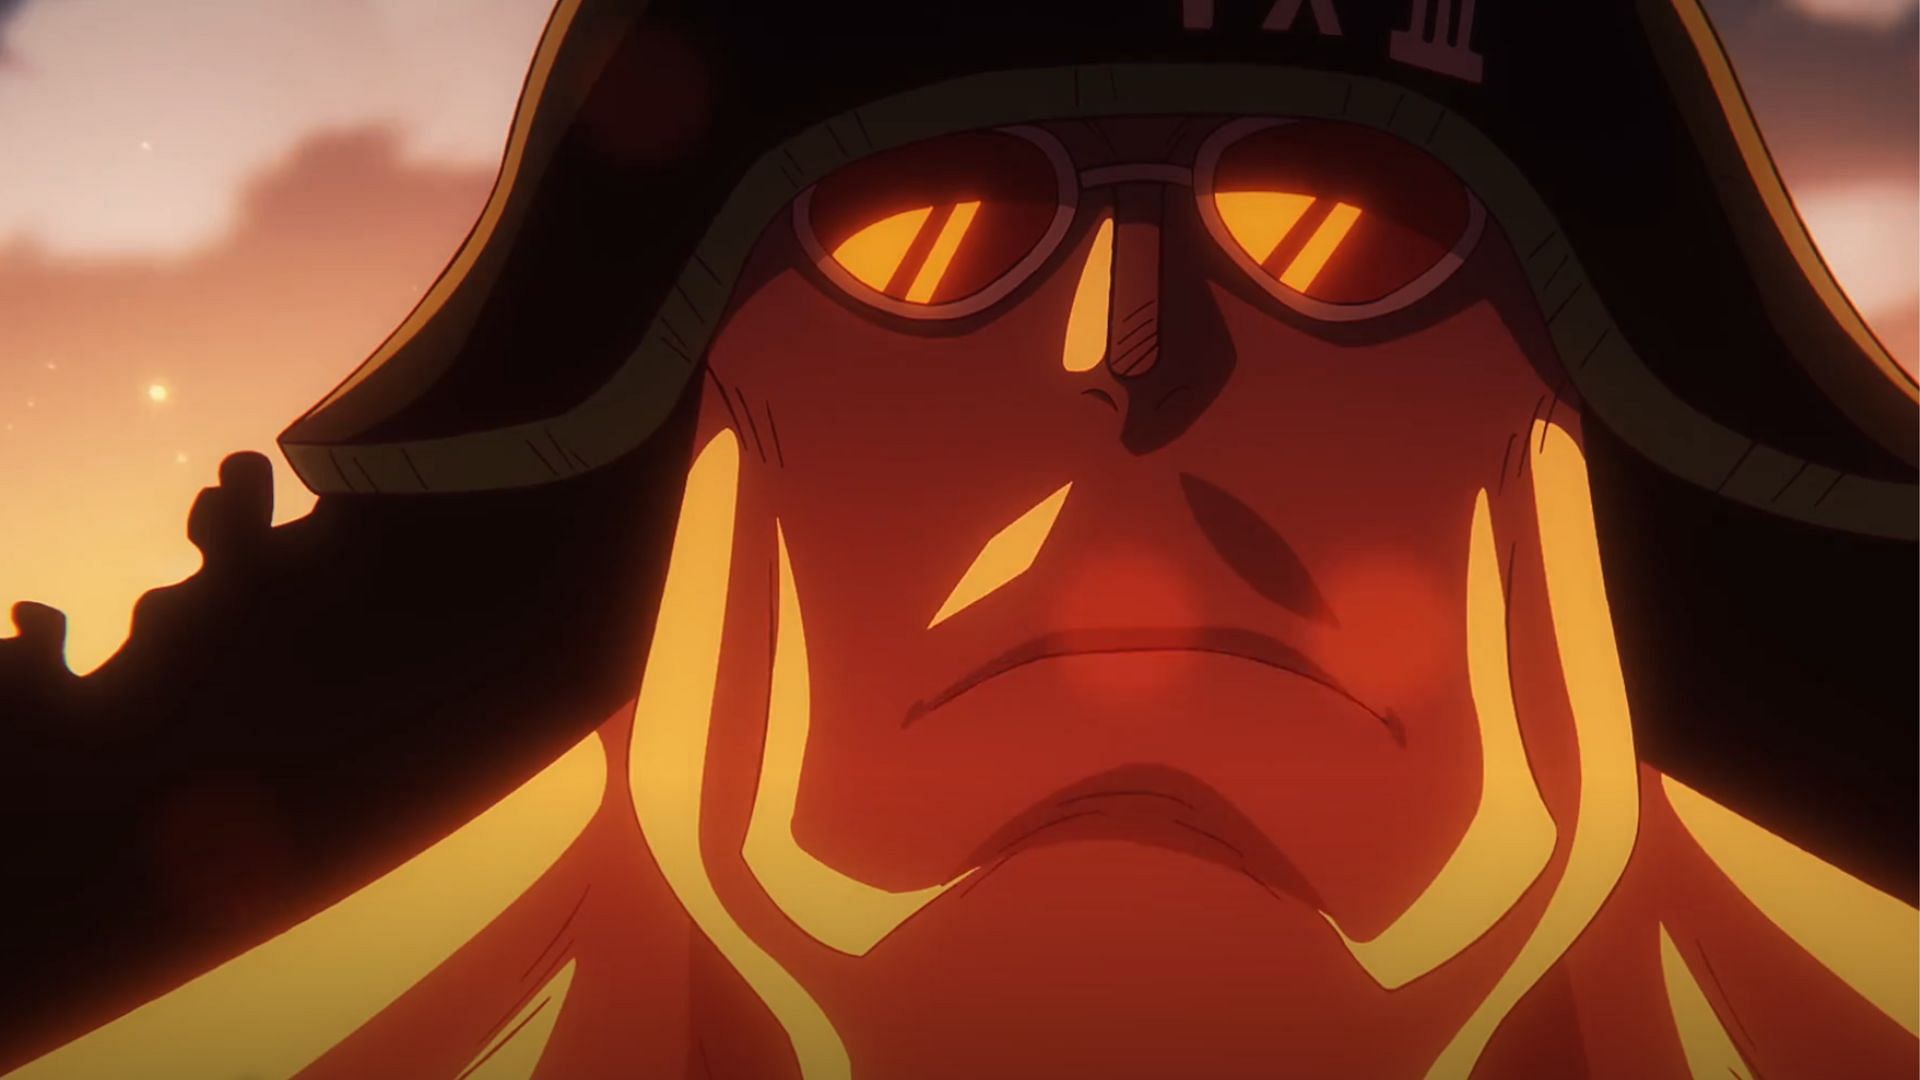 Pacifista Mk. III as seen in the One Piece anime (Image via Toei)